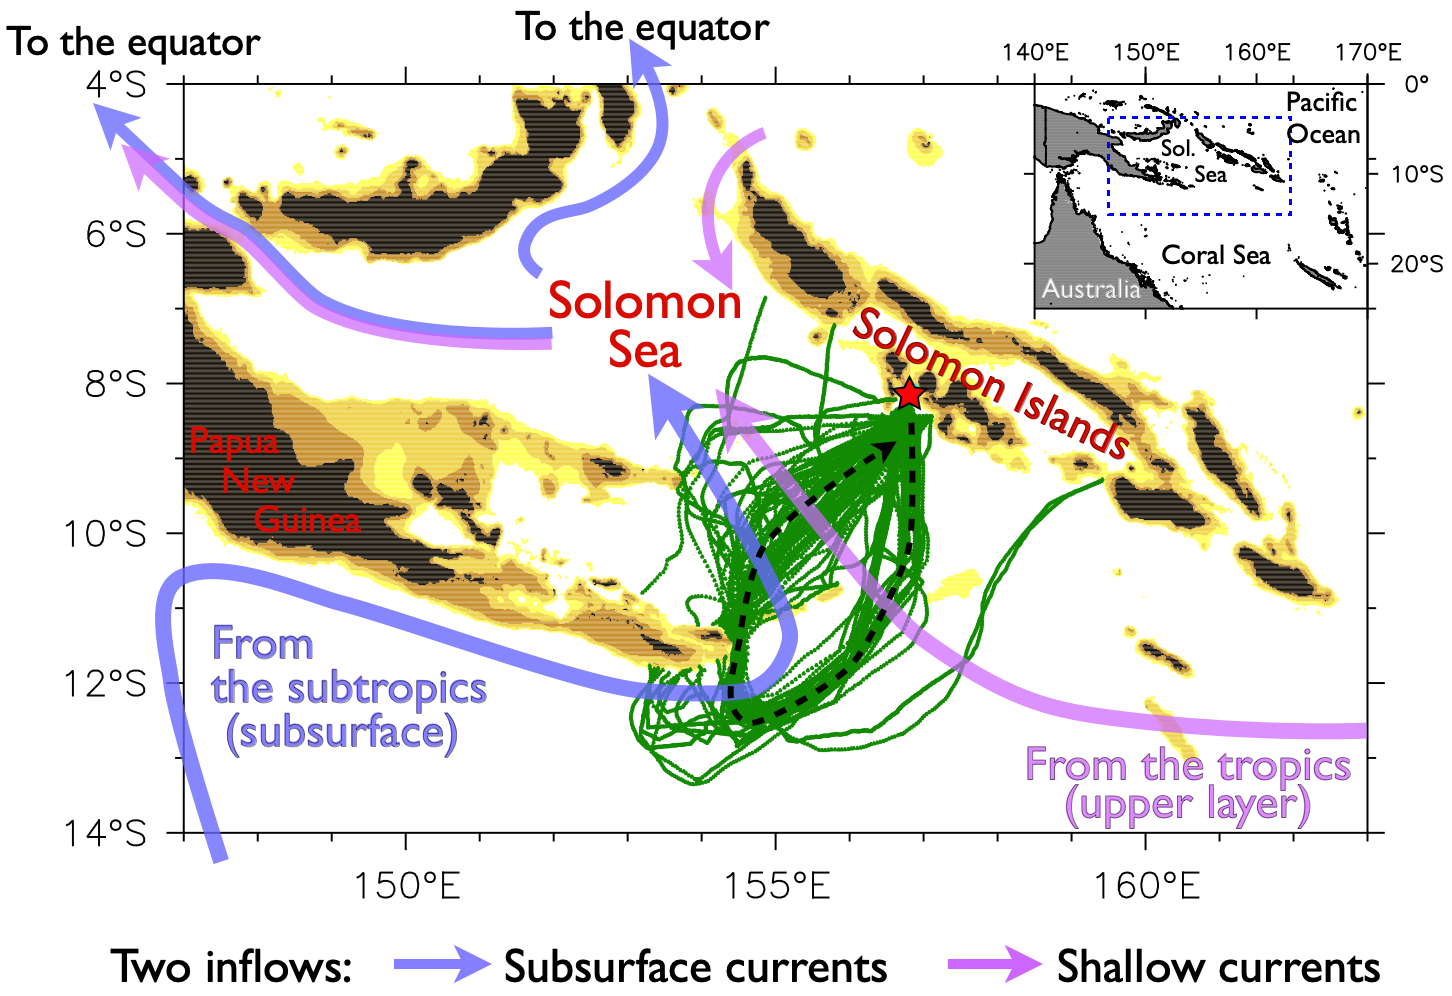 Schematic map of the geography and currents of the Solomon Sea in the southwest Pacific Ocean